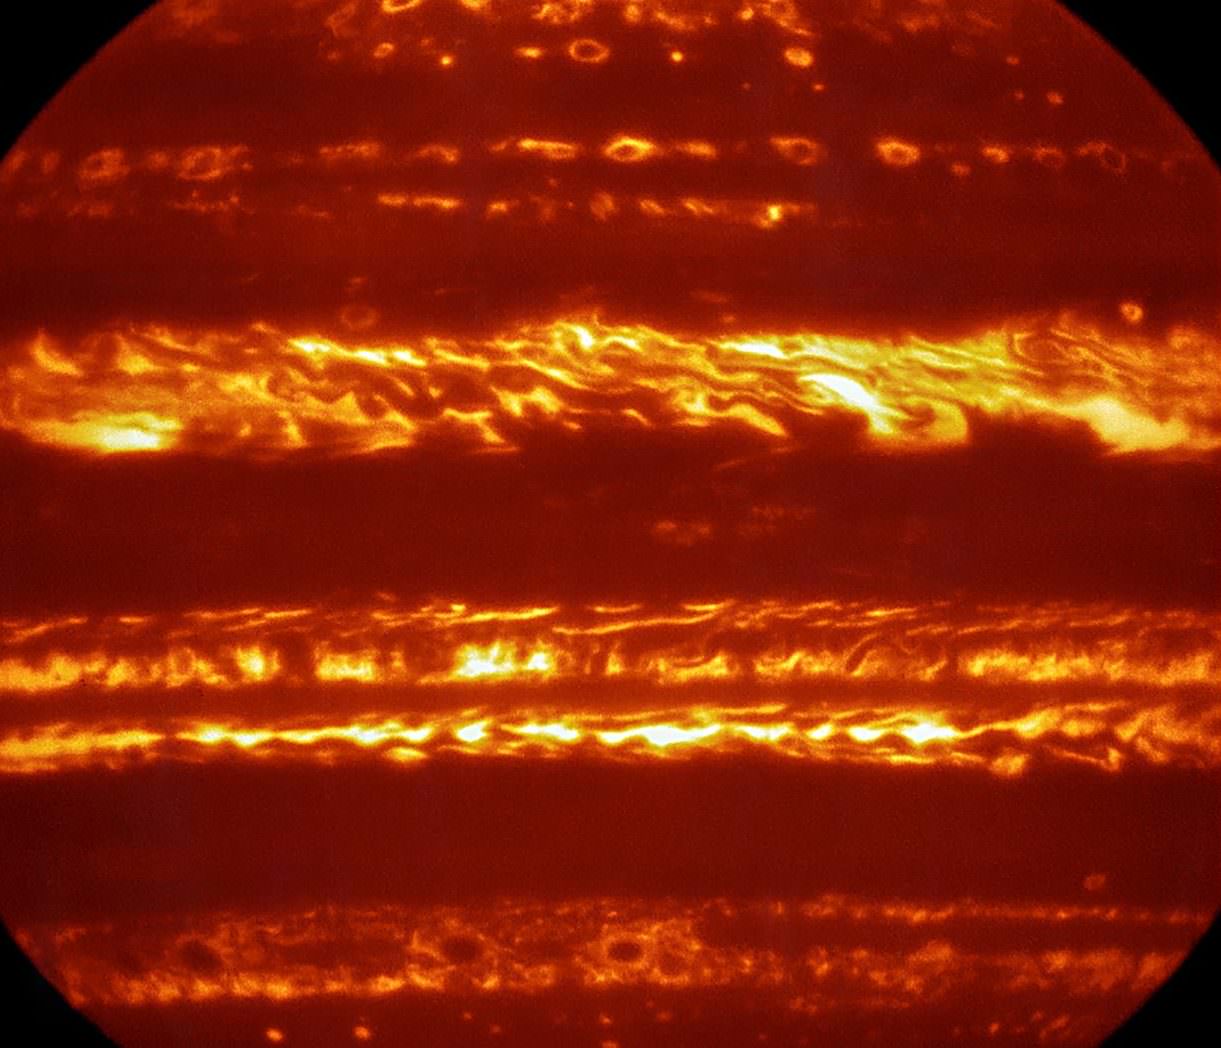 In preparation for the arrival of Juno, the ESO's released stunning IR images of Jupiter, taken by the VLT. Credit: ESO